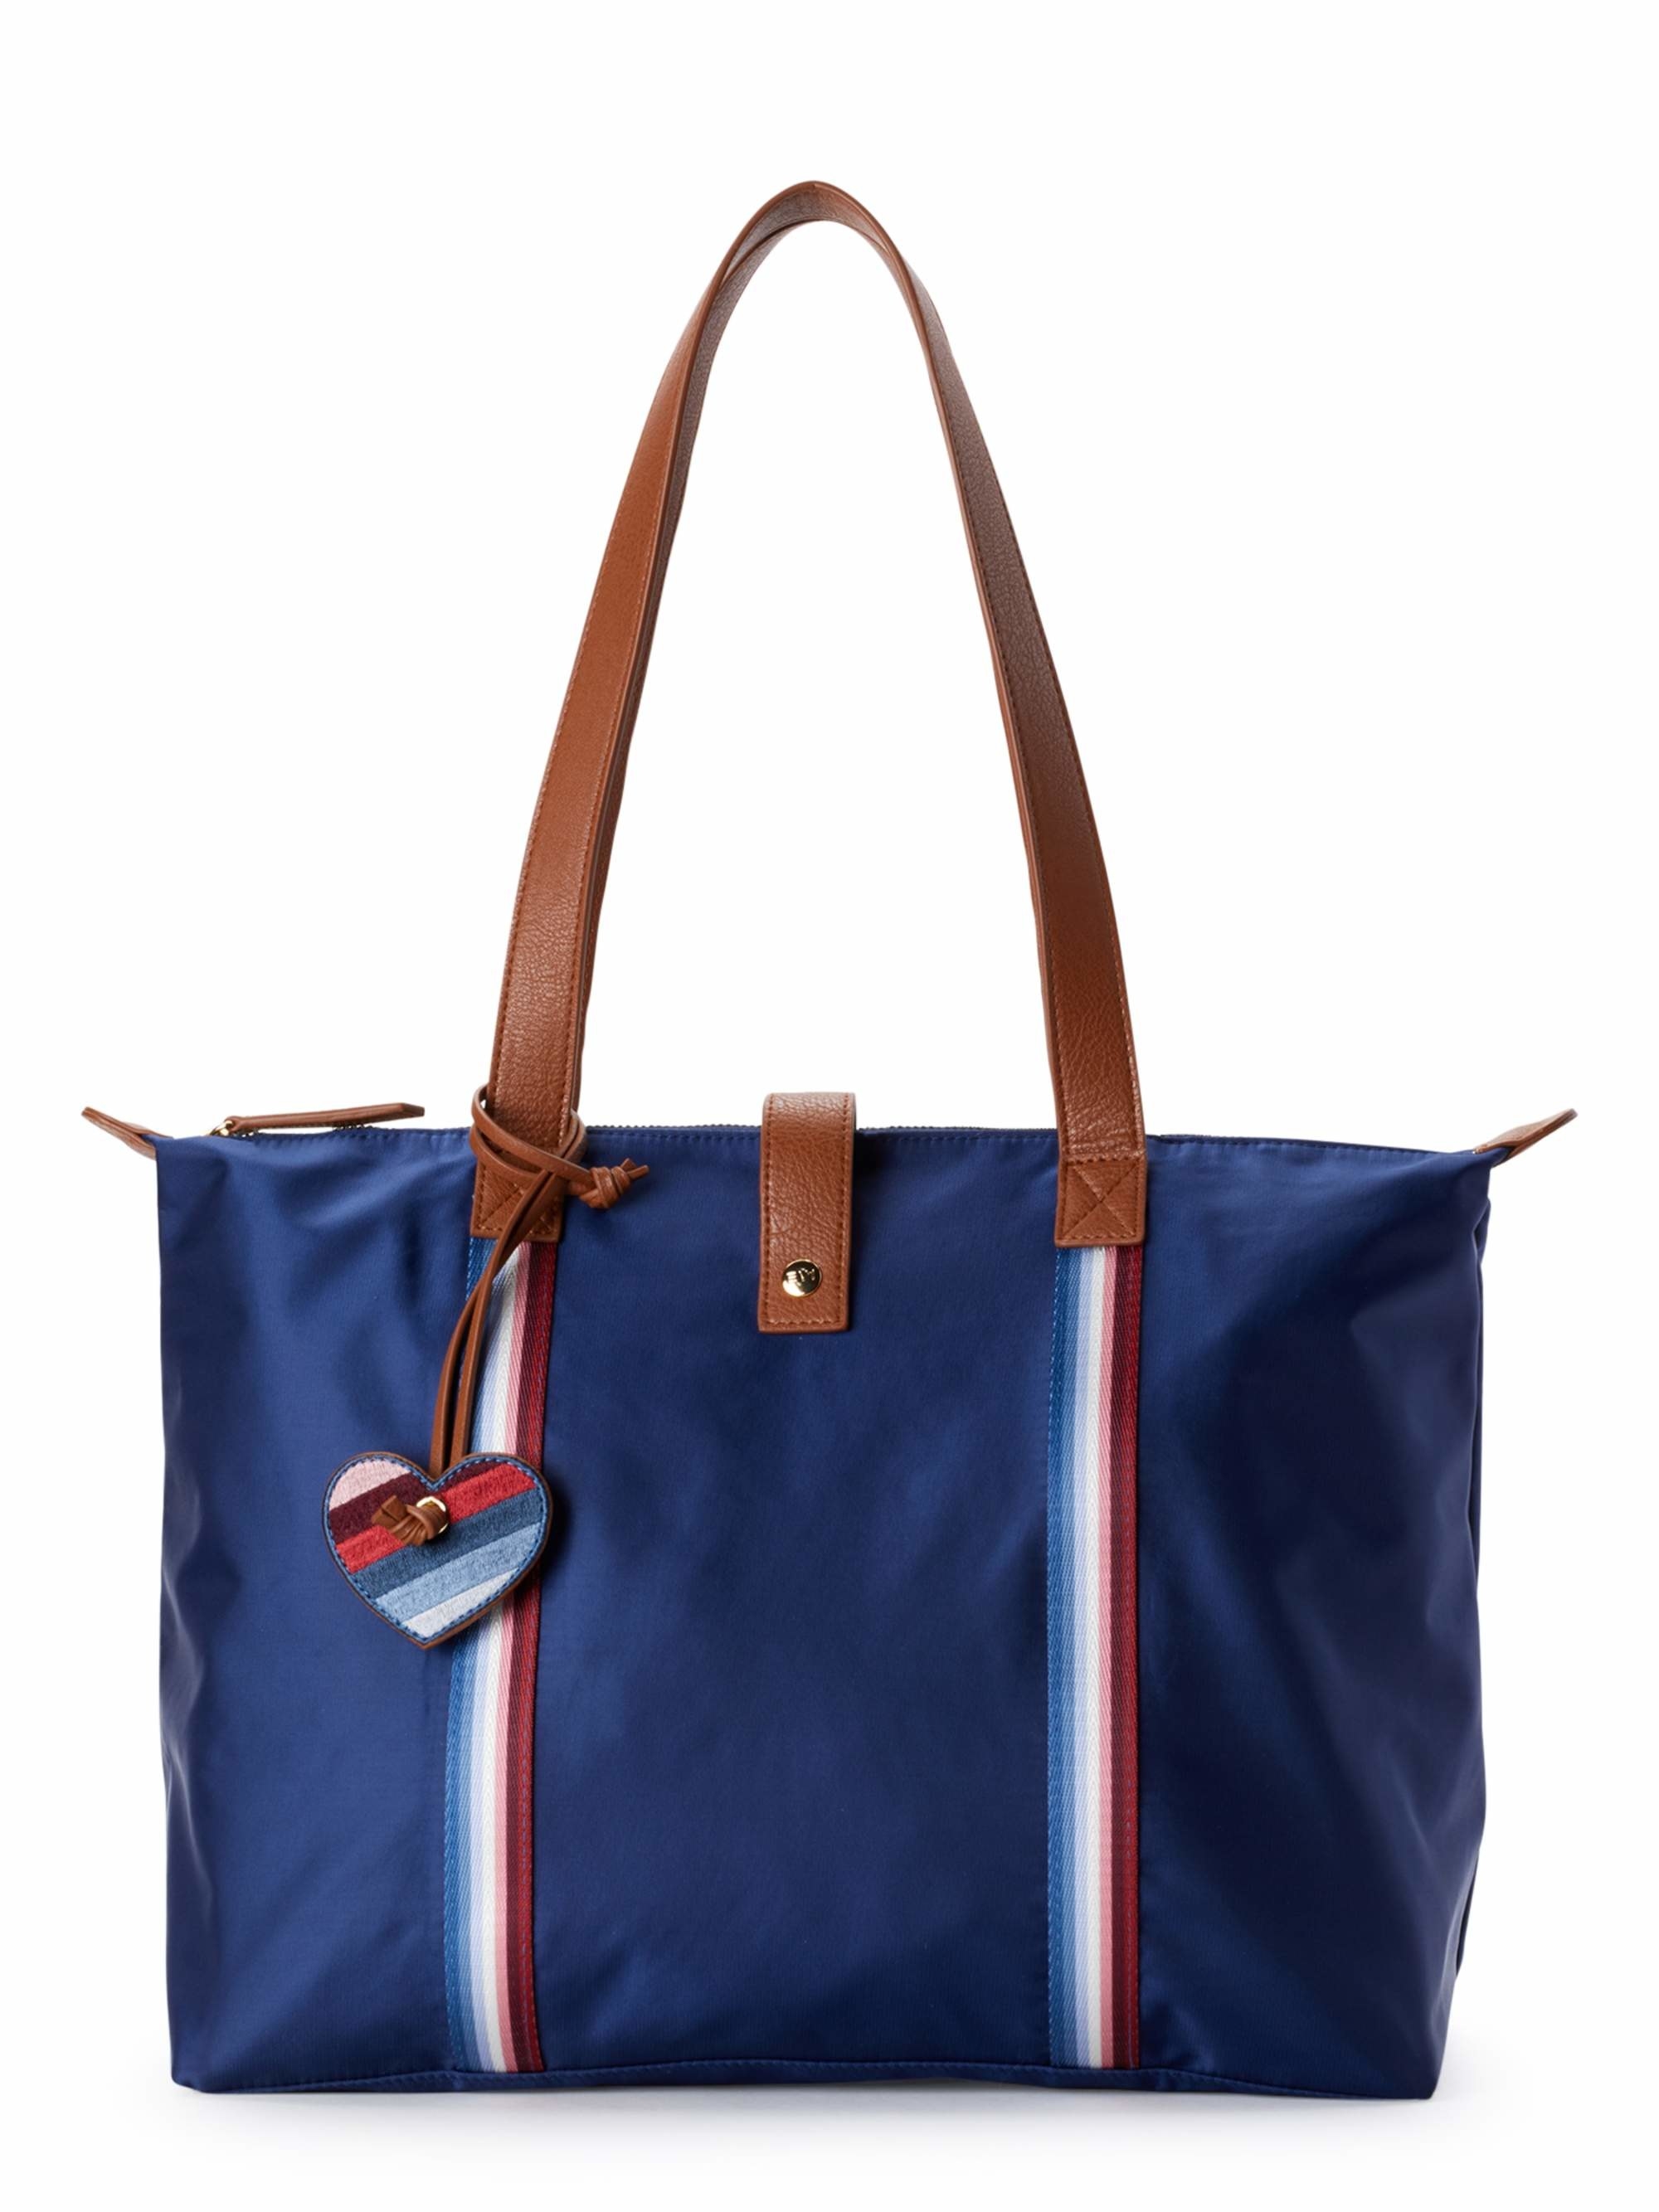 The blue tote bag